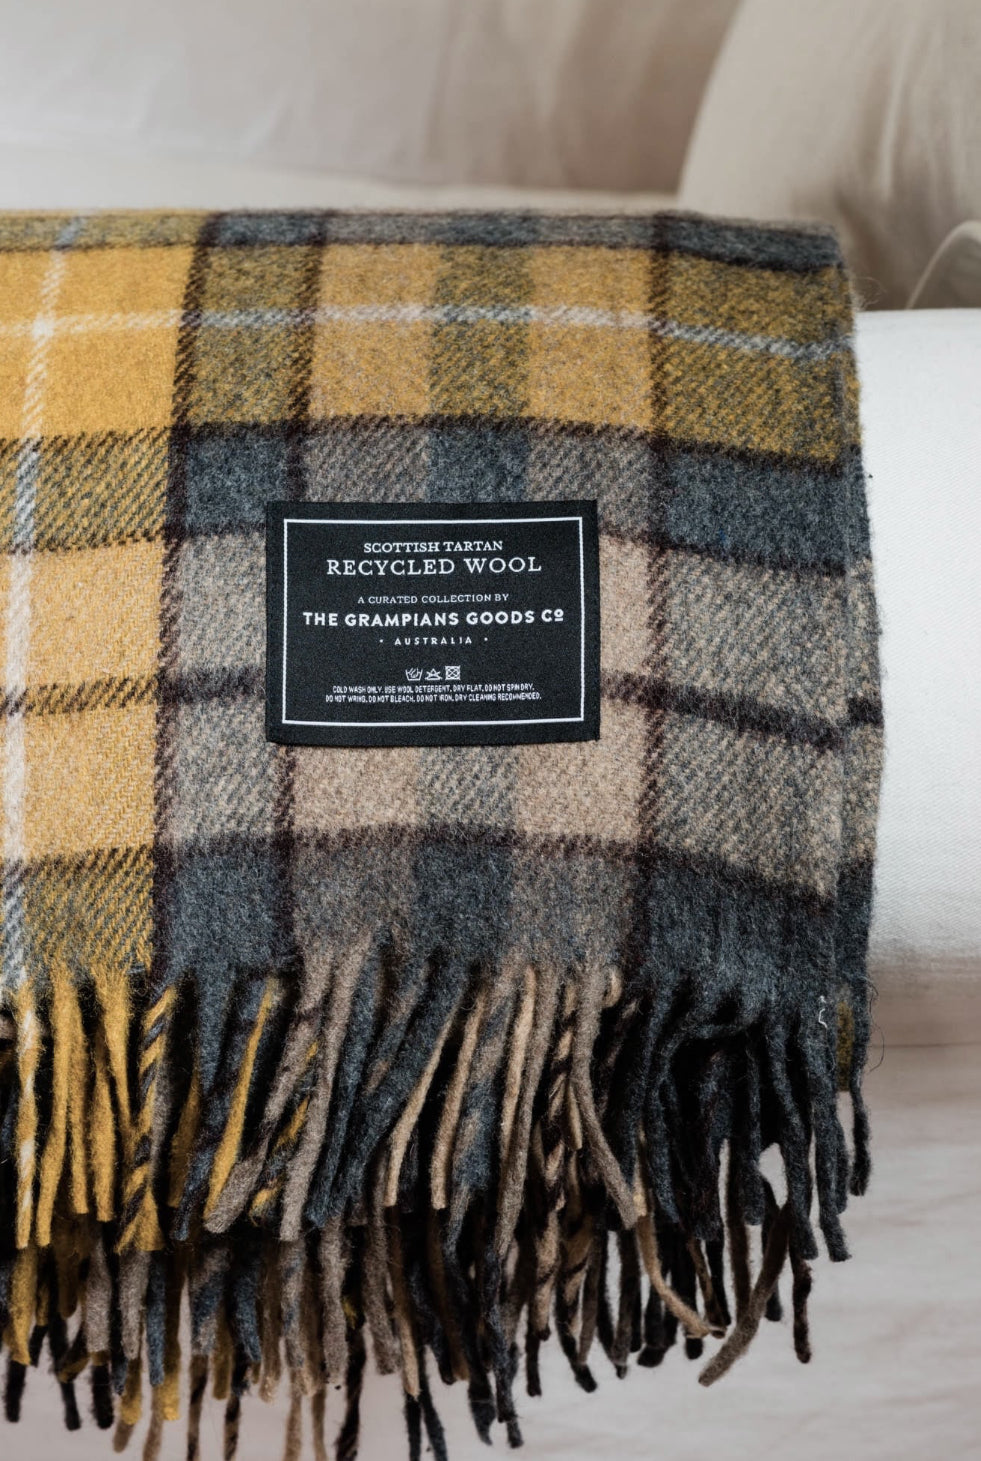 The Grampian Goods Co - HERITAGE COLLECTION Recycled Wool Scottish Tartan Blanket: Gold